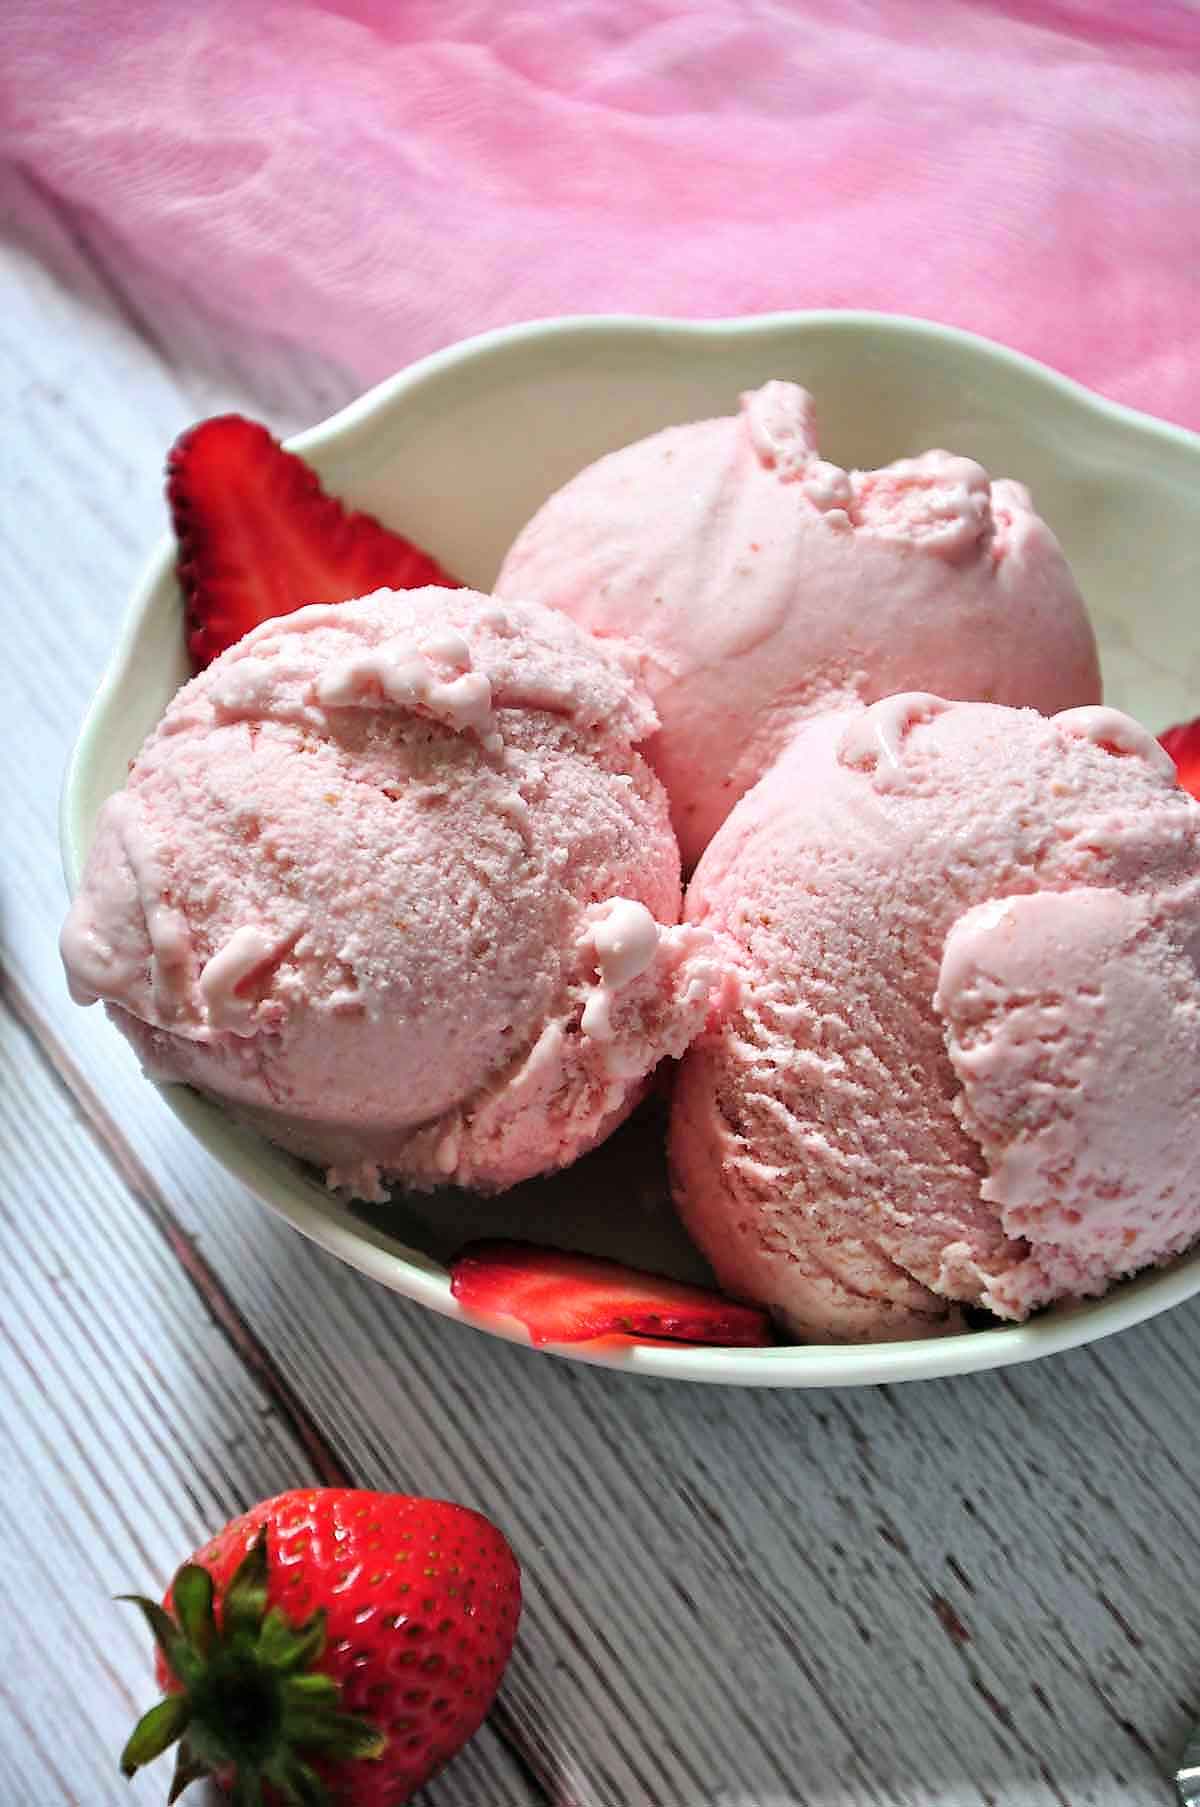 Three scoops of strawberry ice cream in a bowl.